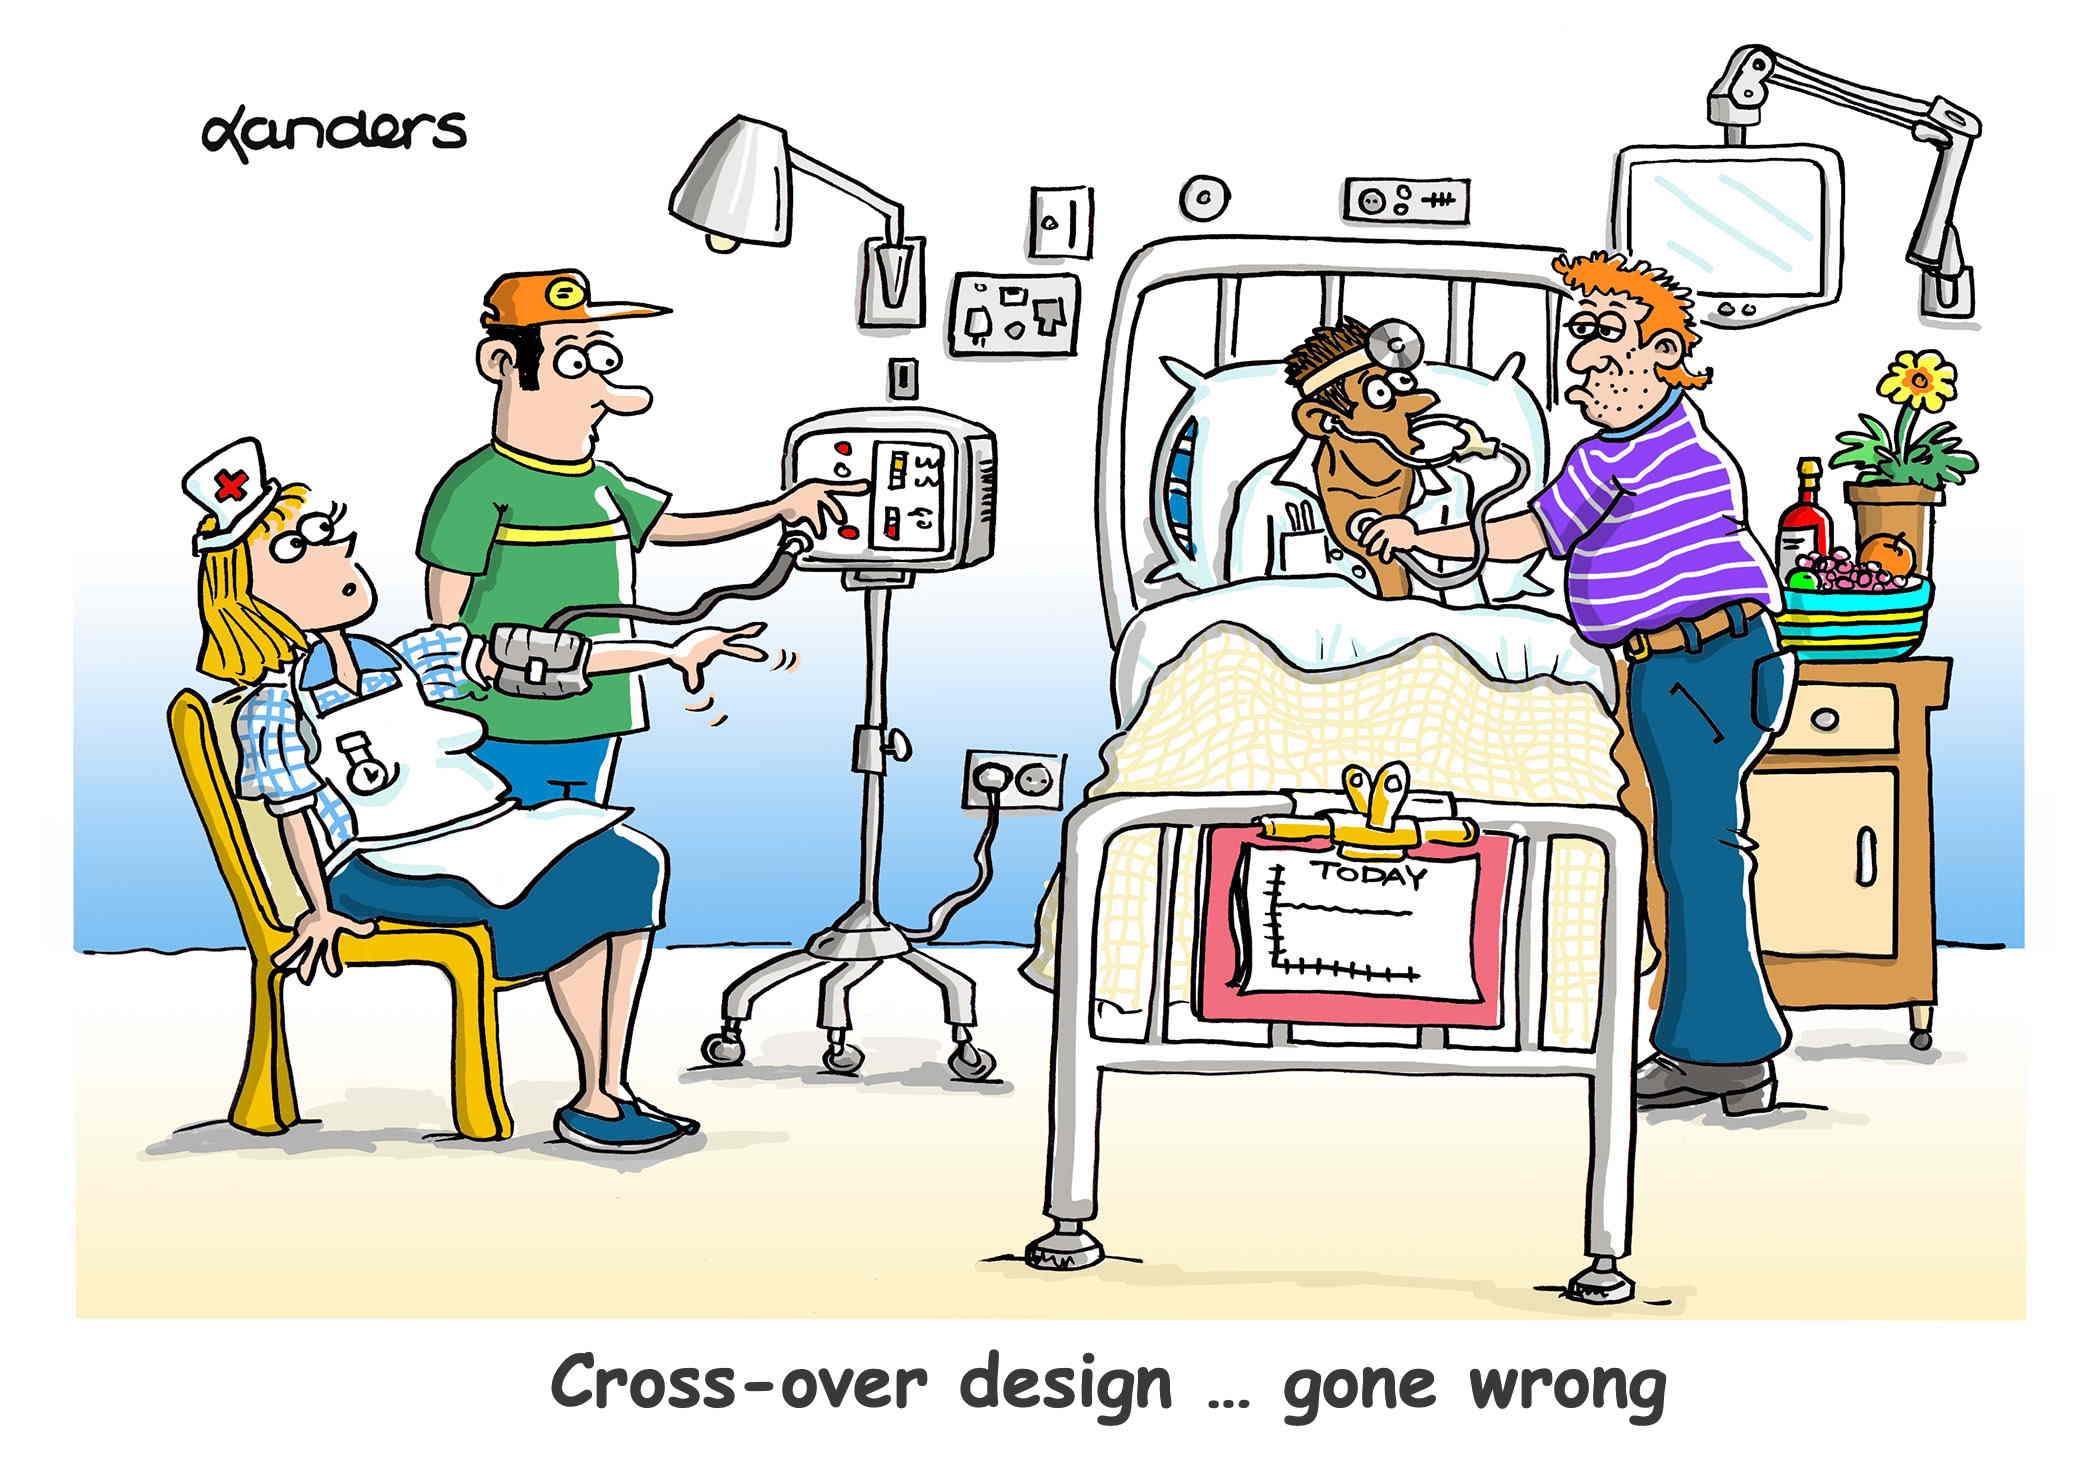 cartoon in hospita room with Doctor in bed and nurse in chair while  non-professionals are taking their temperature and blood pressure. Caption says: "Cross-over design ... gone wrong"